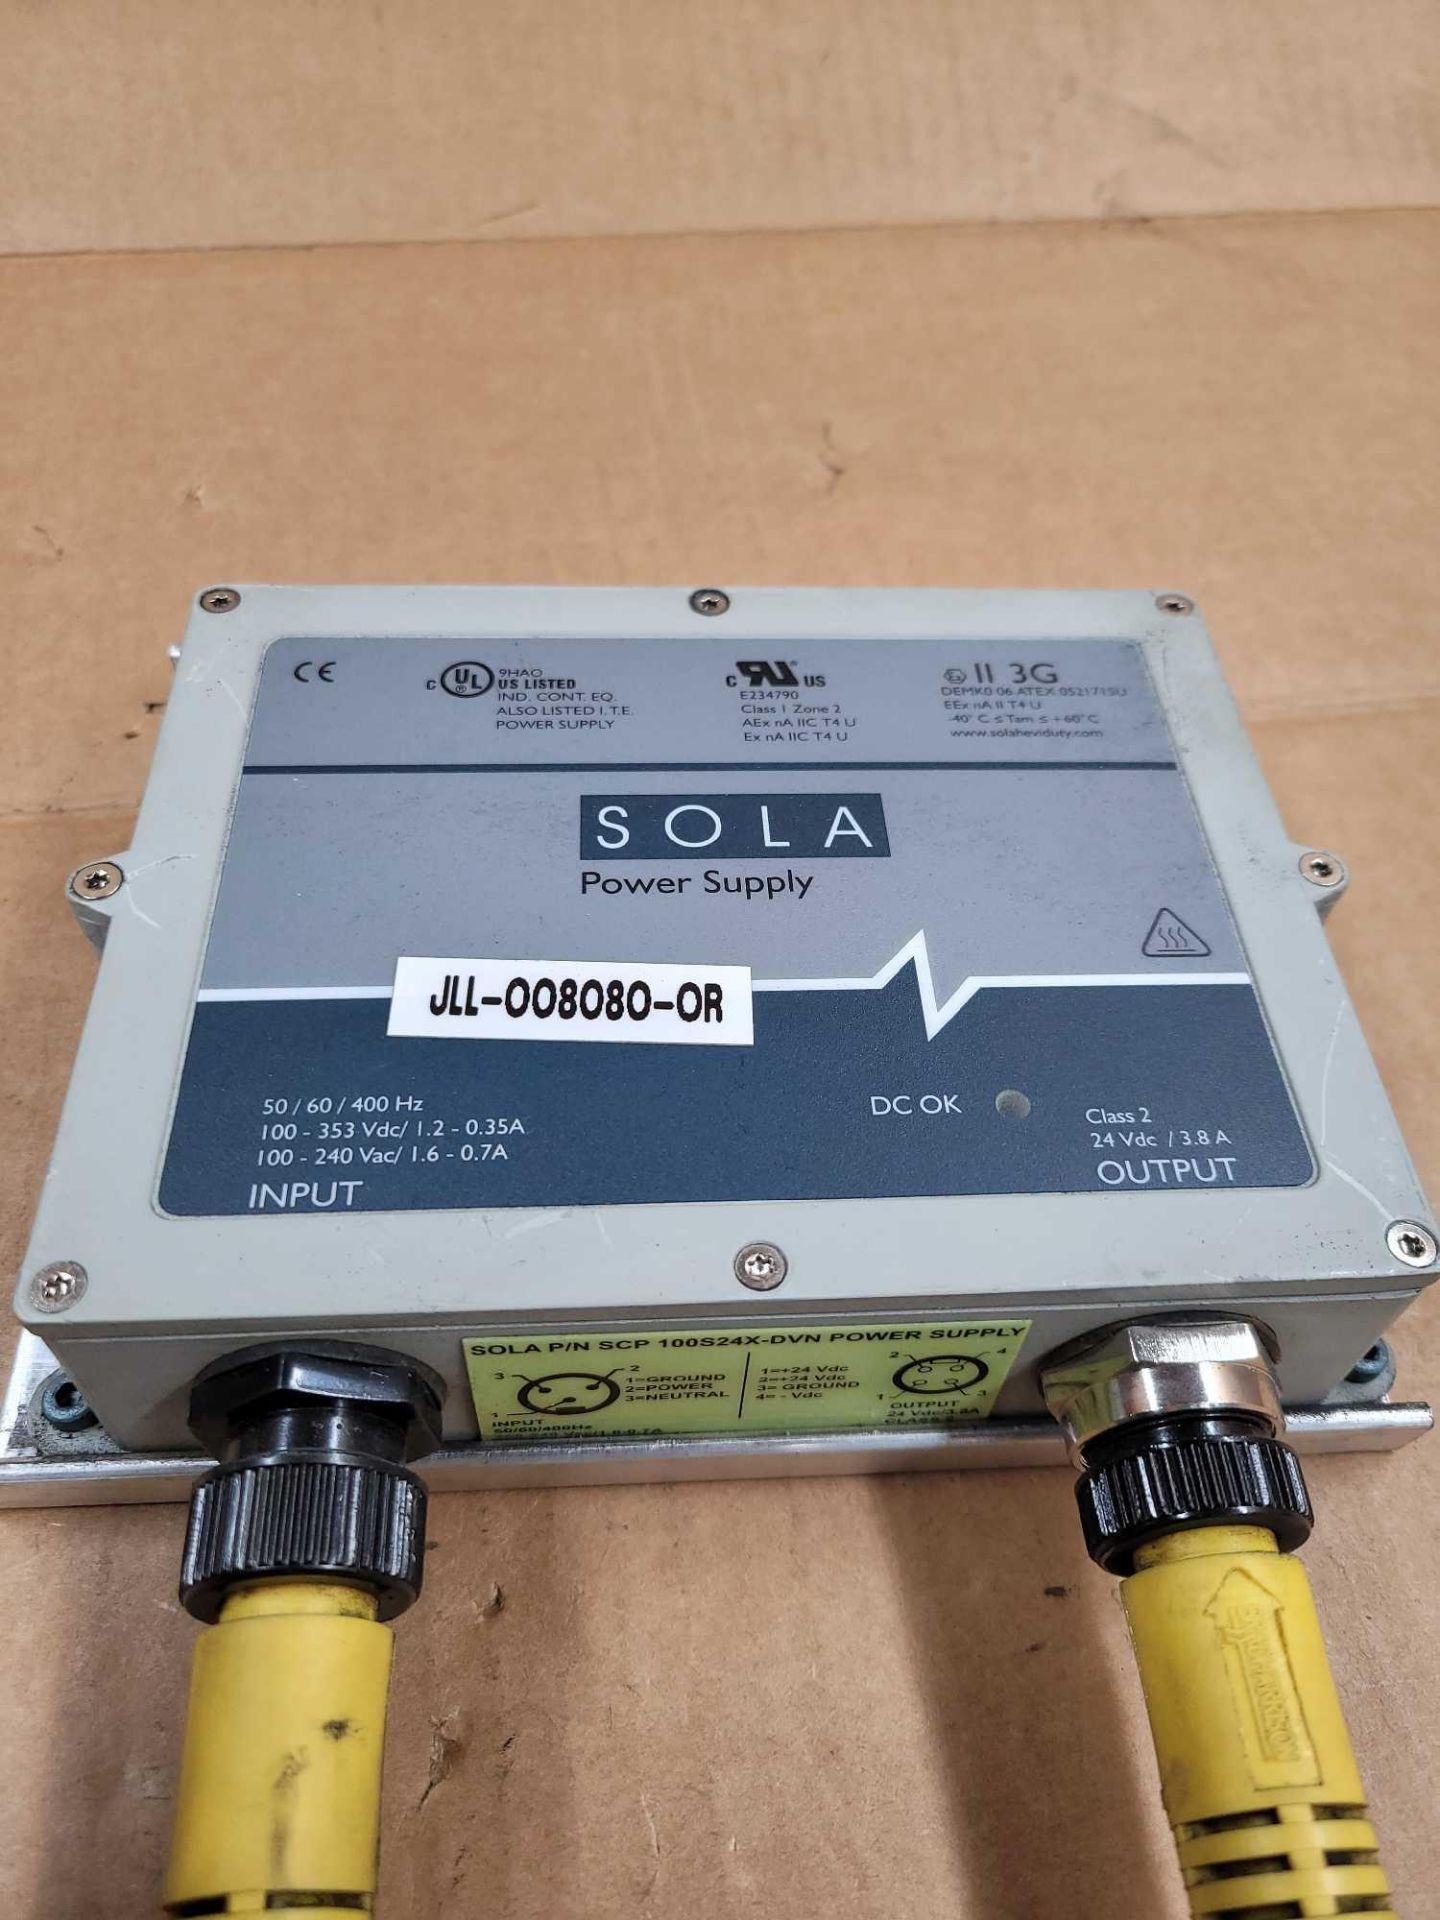 LOT OF 4 SOLA SCP 100S24X-DVN / Power Supply  /  Lot Weight: 13.2 lbs - Image 2 of 6